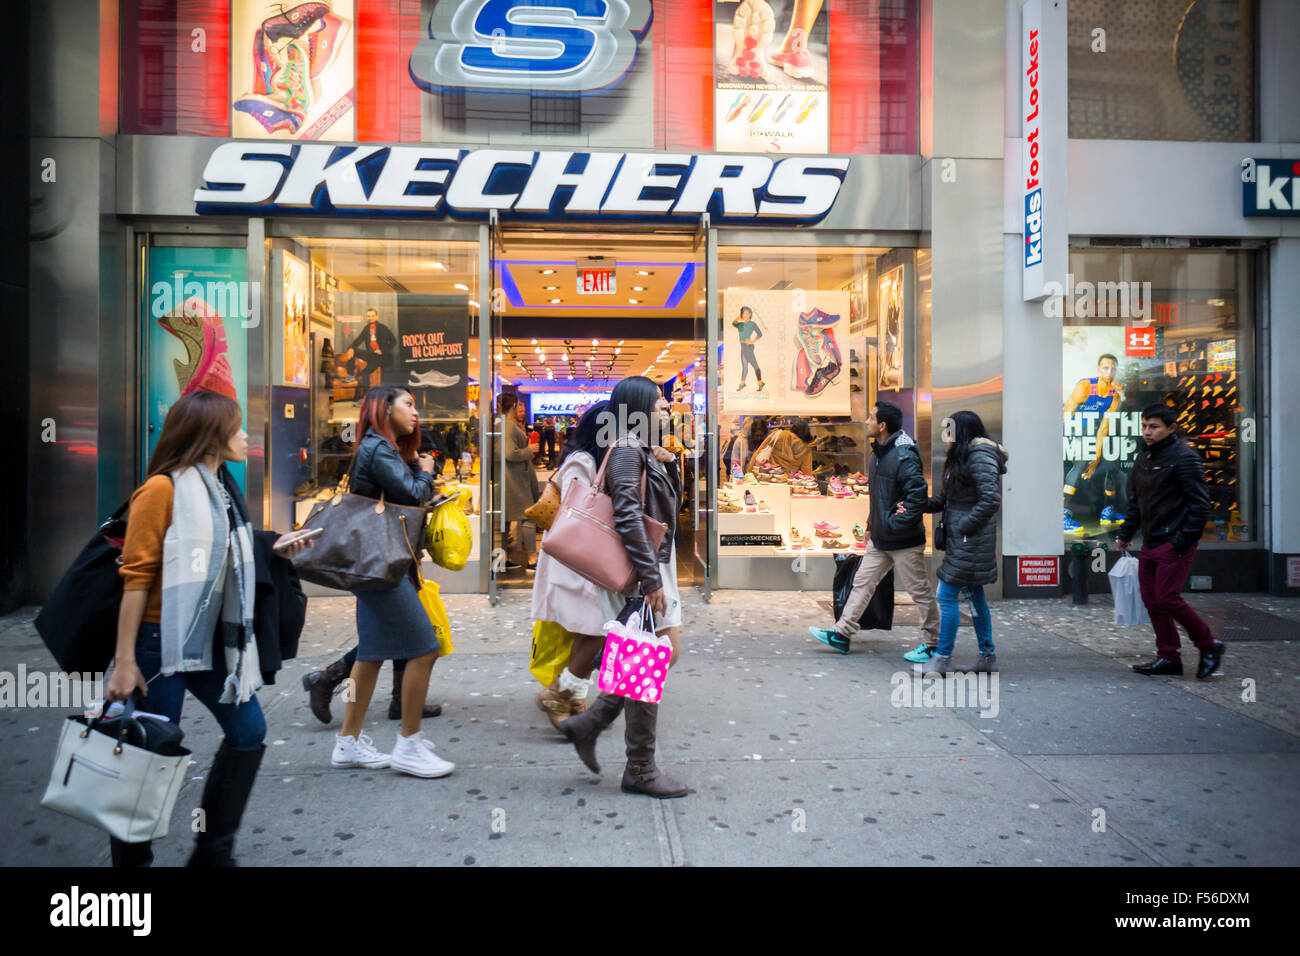 A Skechers store in Times Square in New 